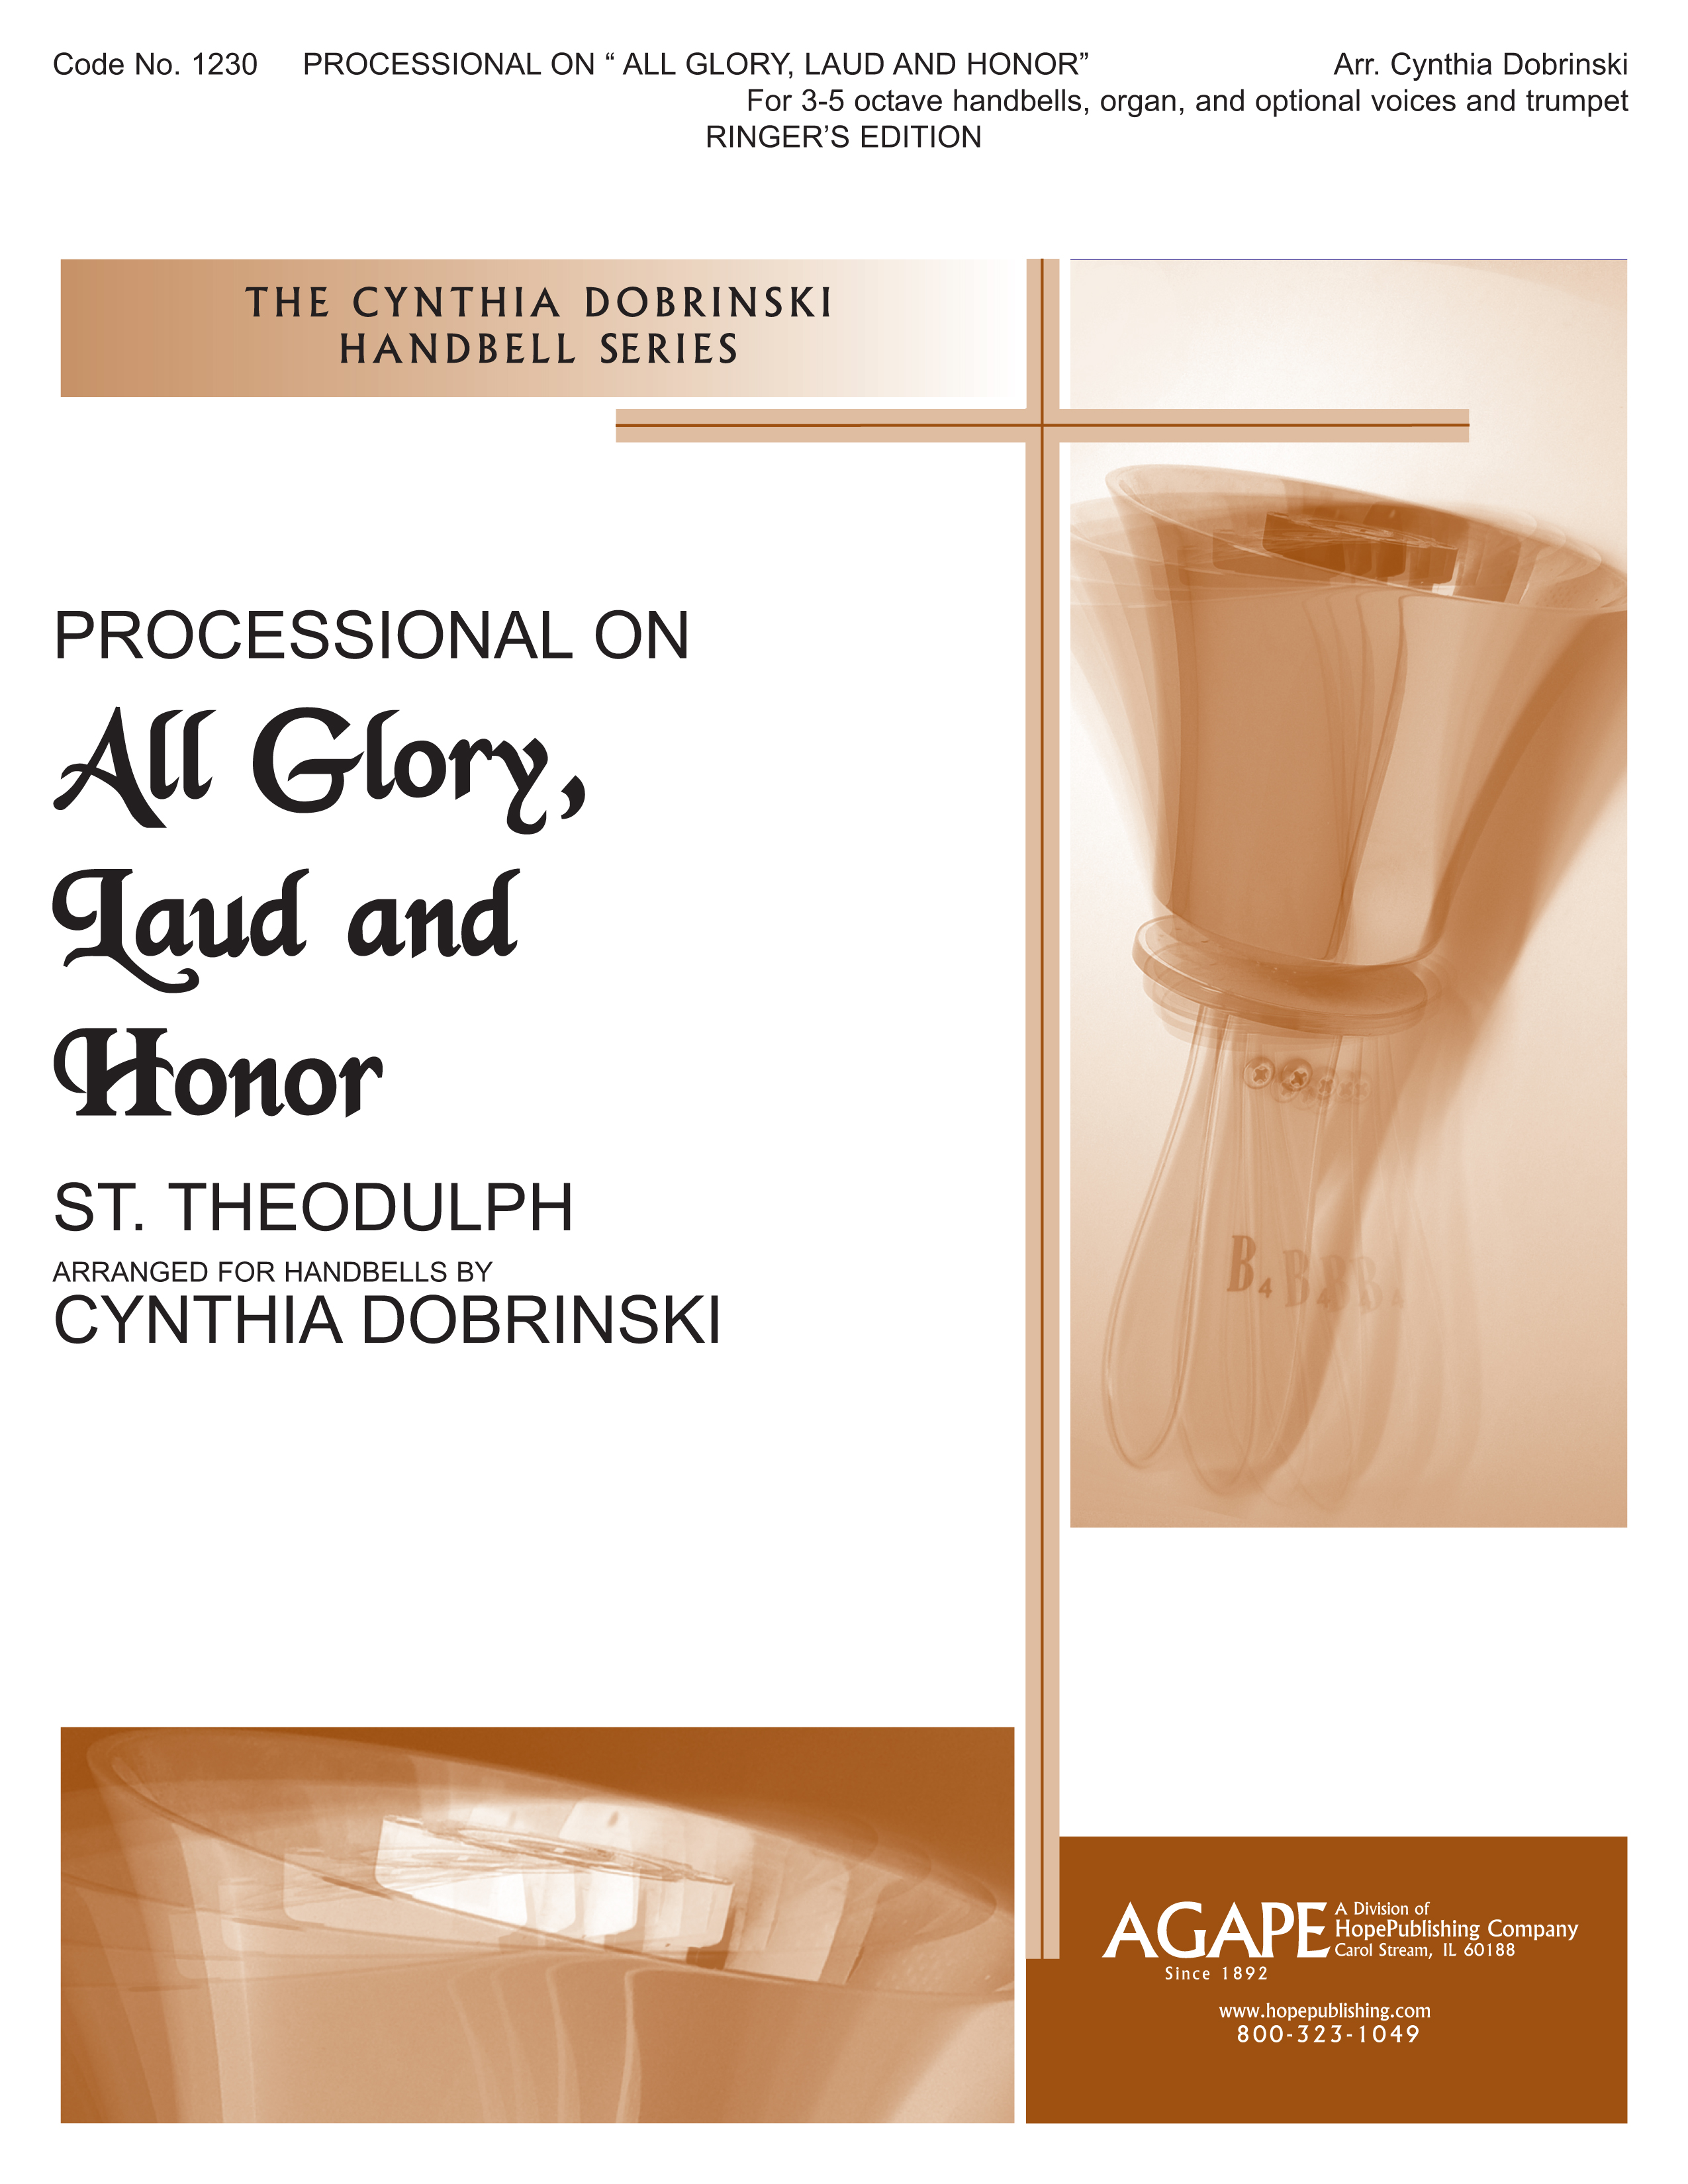 Processional on "All Glory Laud and Honor" - 3-5 Oct. Cover Image